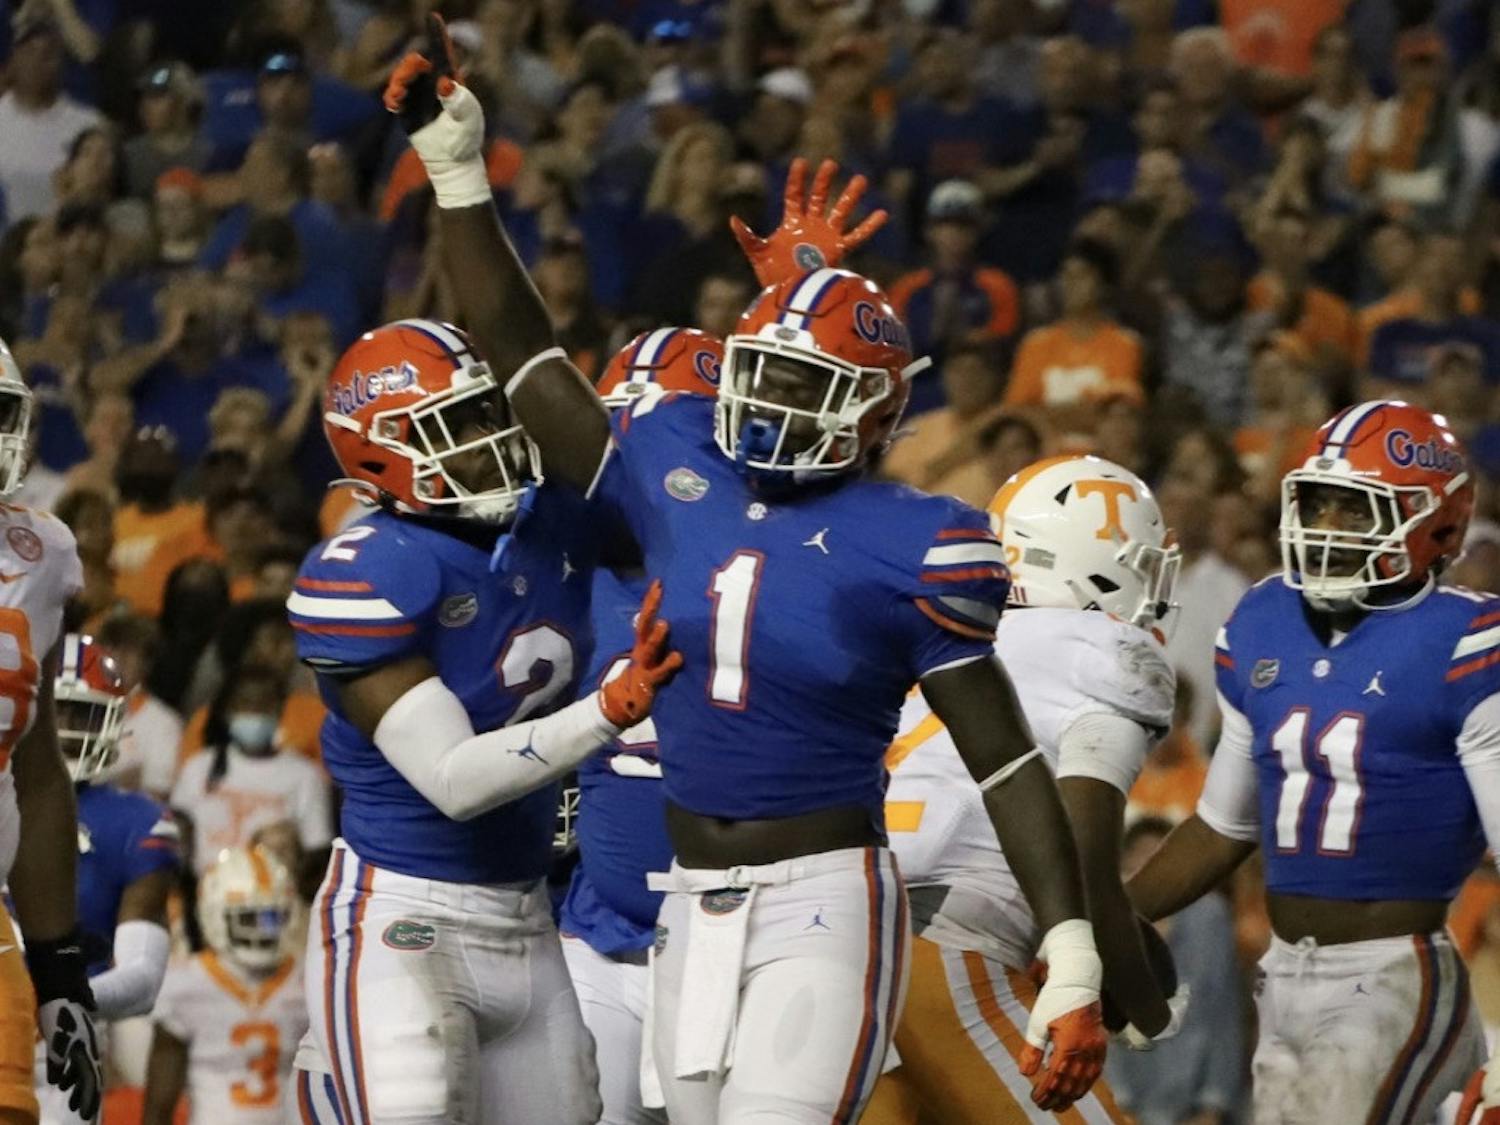 Florida's Brenton Cox celebrates during a play in a game against Tennessee on Sept. 18.